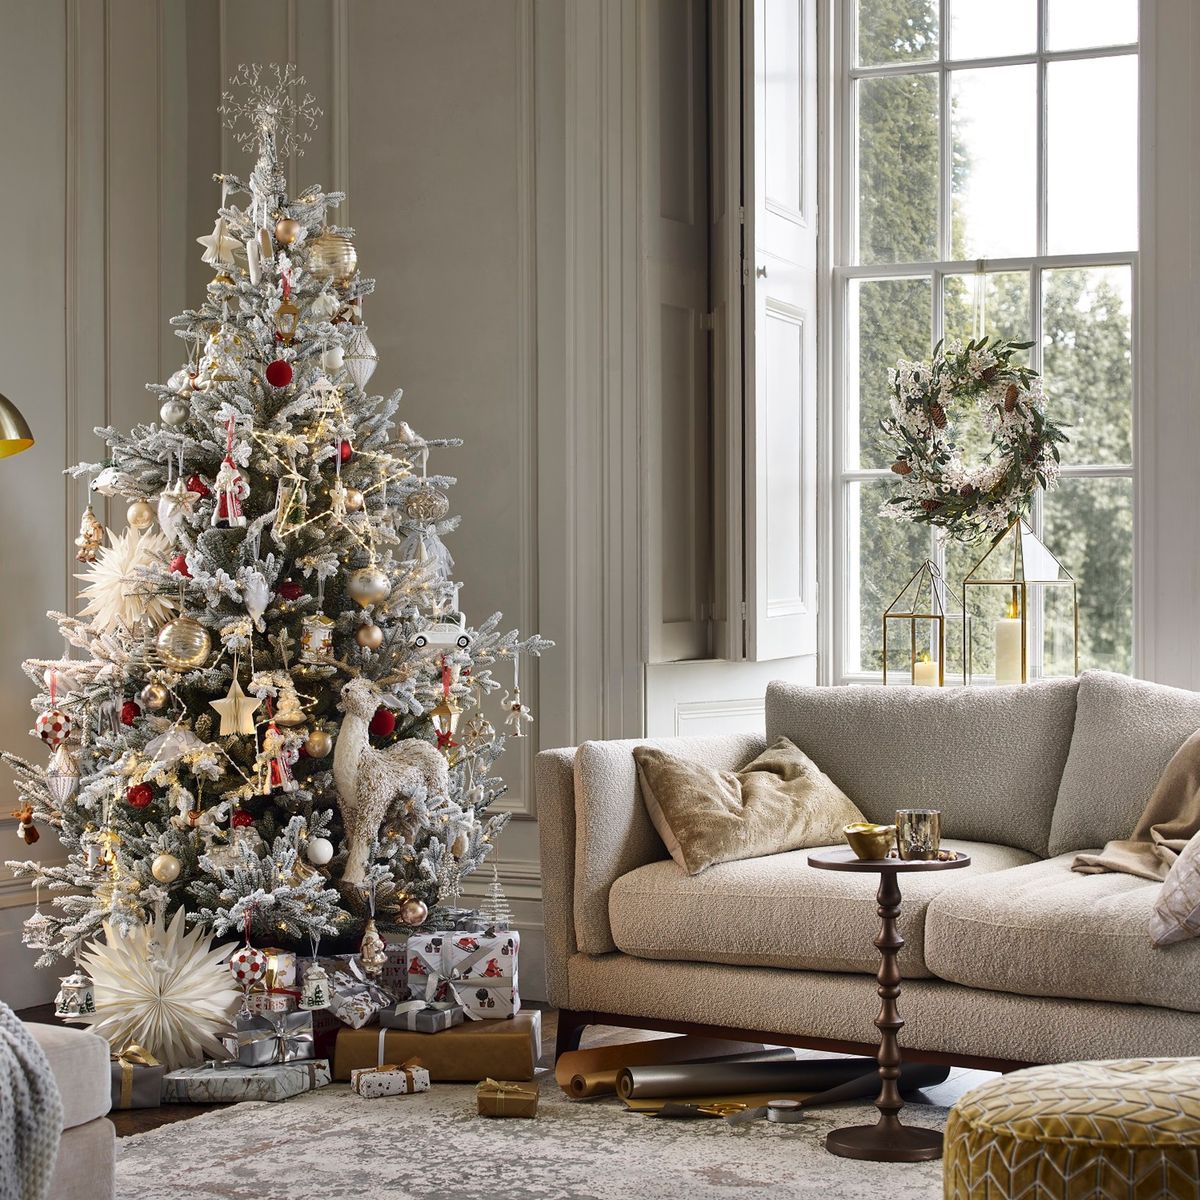 John Lewis reveals its most popular Christmas decorating theme for 2022